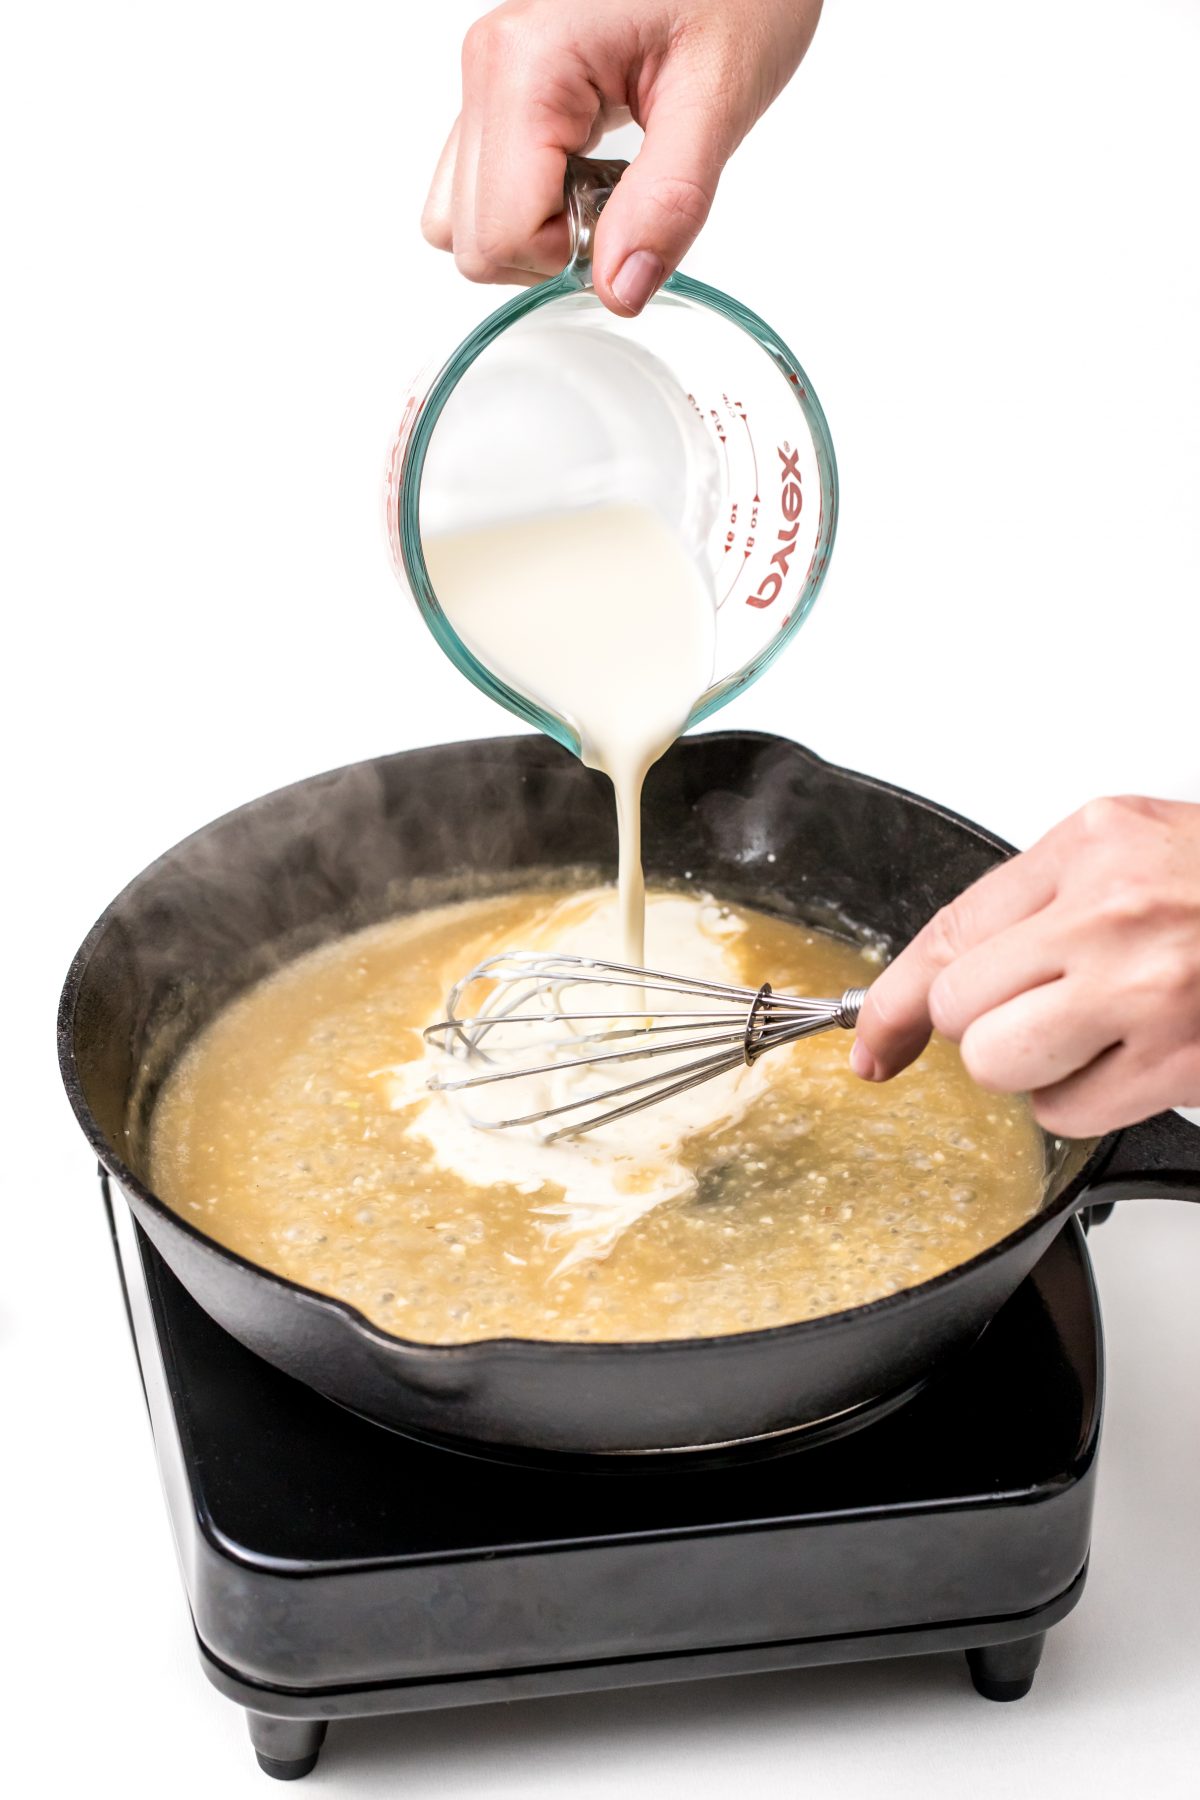 Pour in heavy cream and whisk